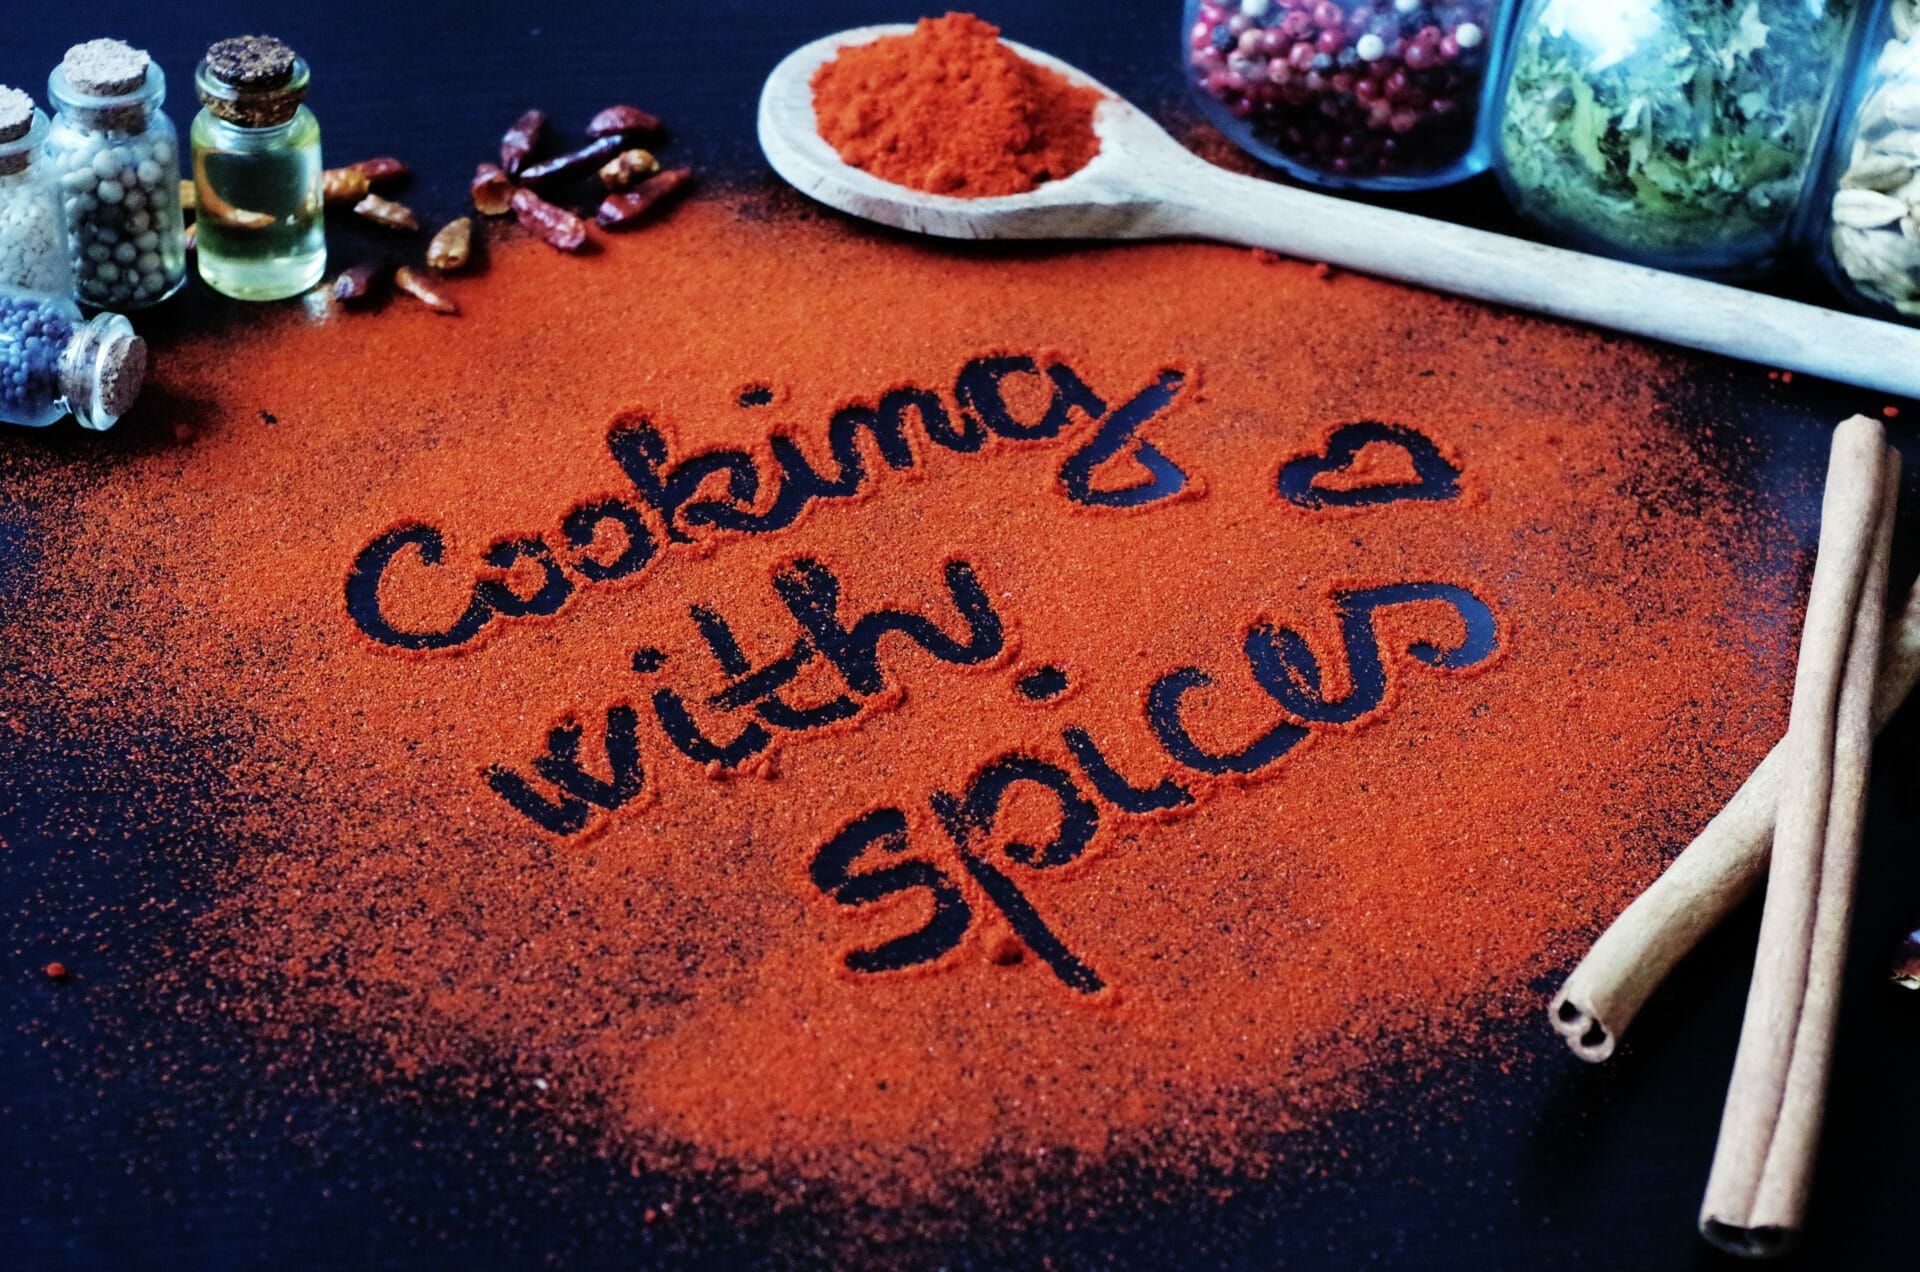 https://spiceitupp.com/wp-content/uploads/2019/04/Cooking-with-spices-image.jpg